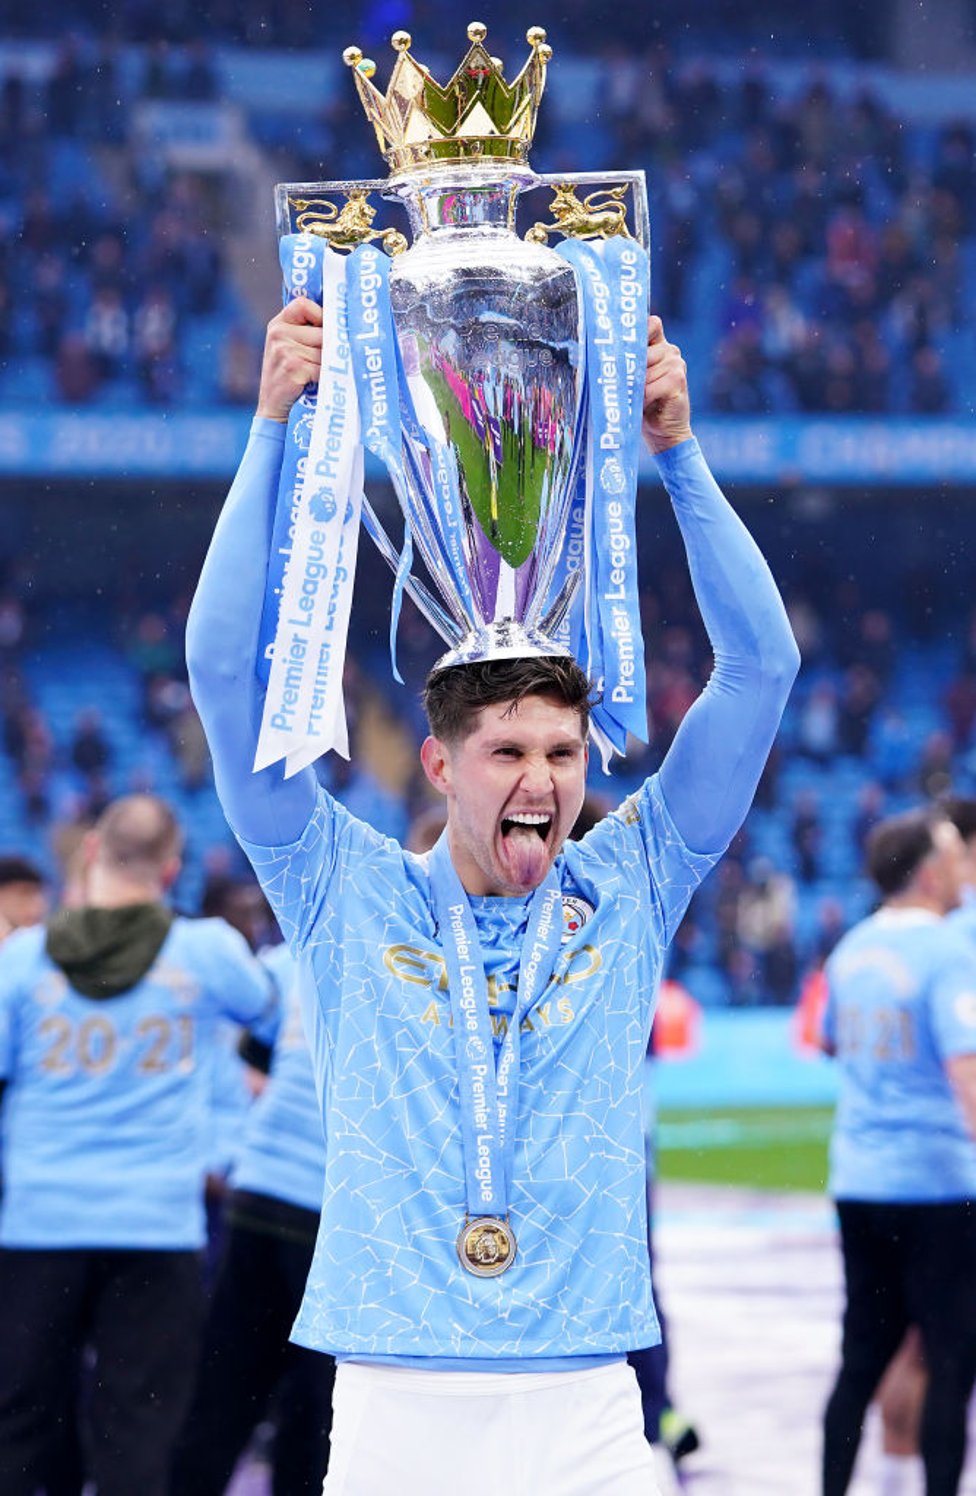 ROLLING STONES : Our centre-back crowns himself with the trophy!